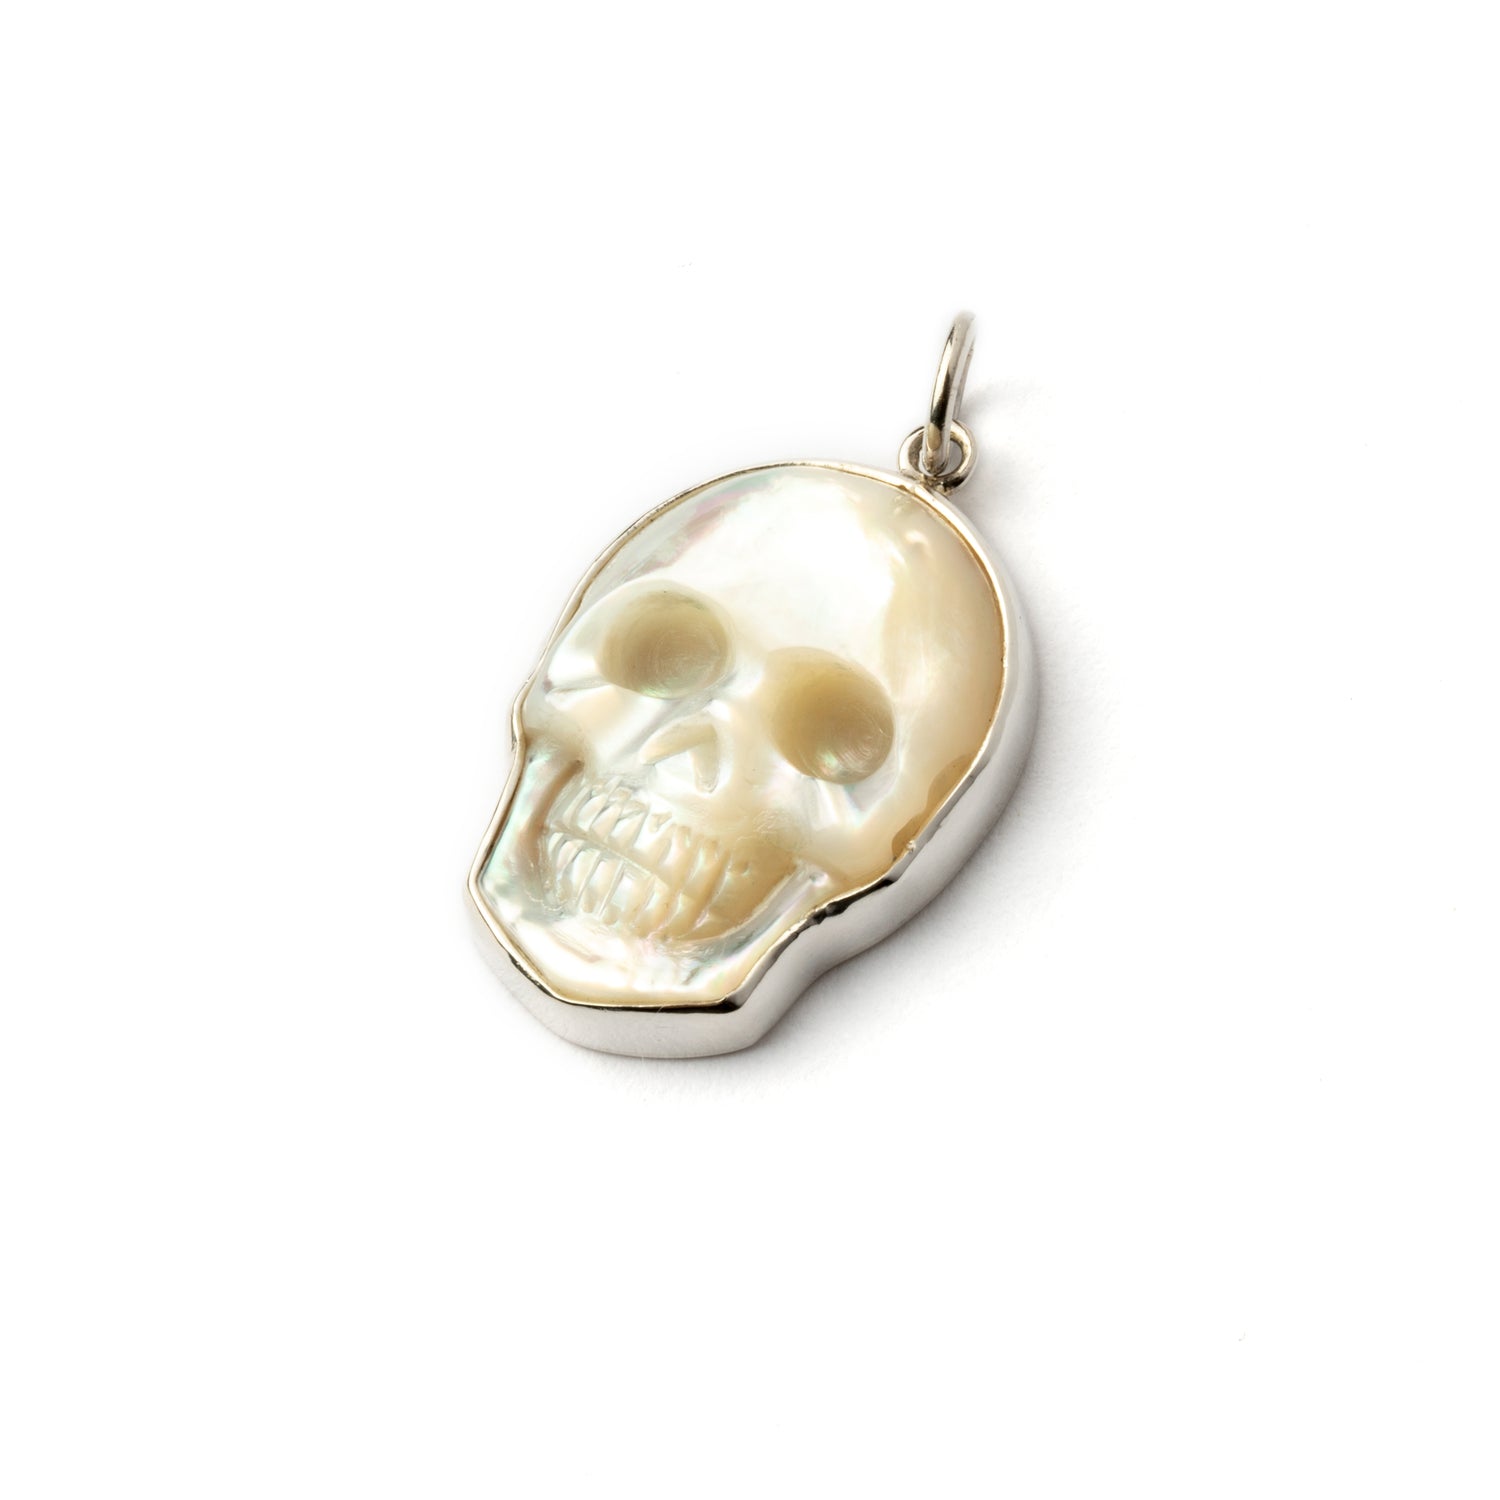 Mother of Pearl Skull Necklace right side view